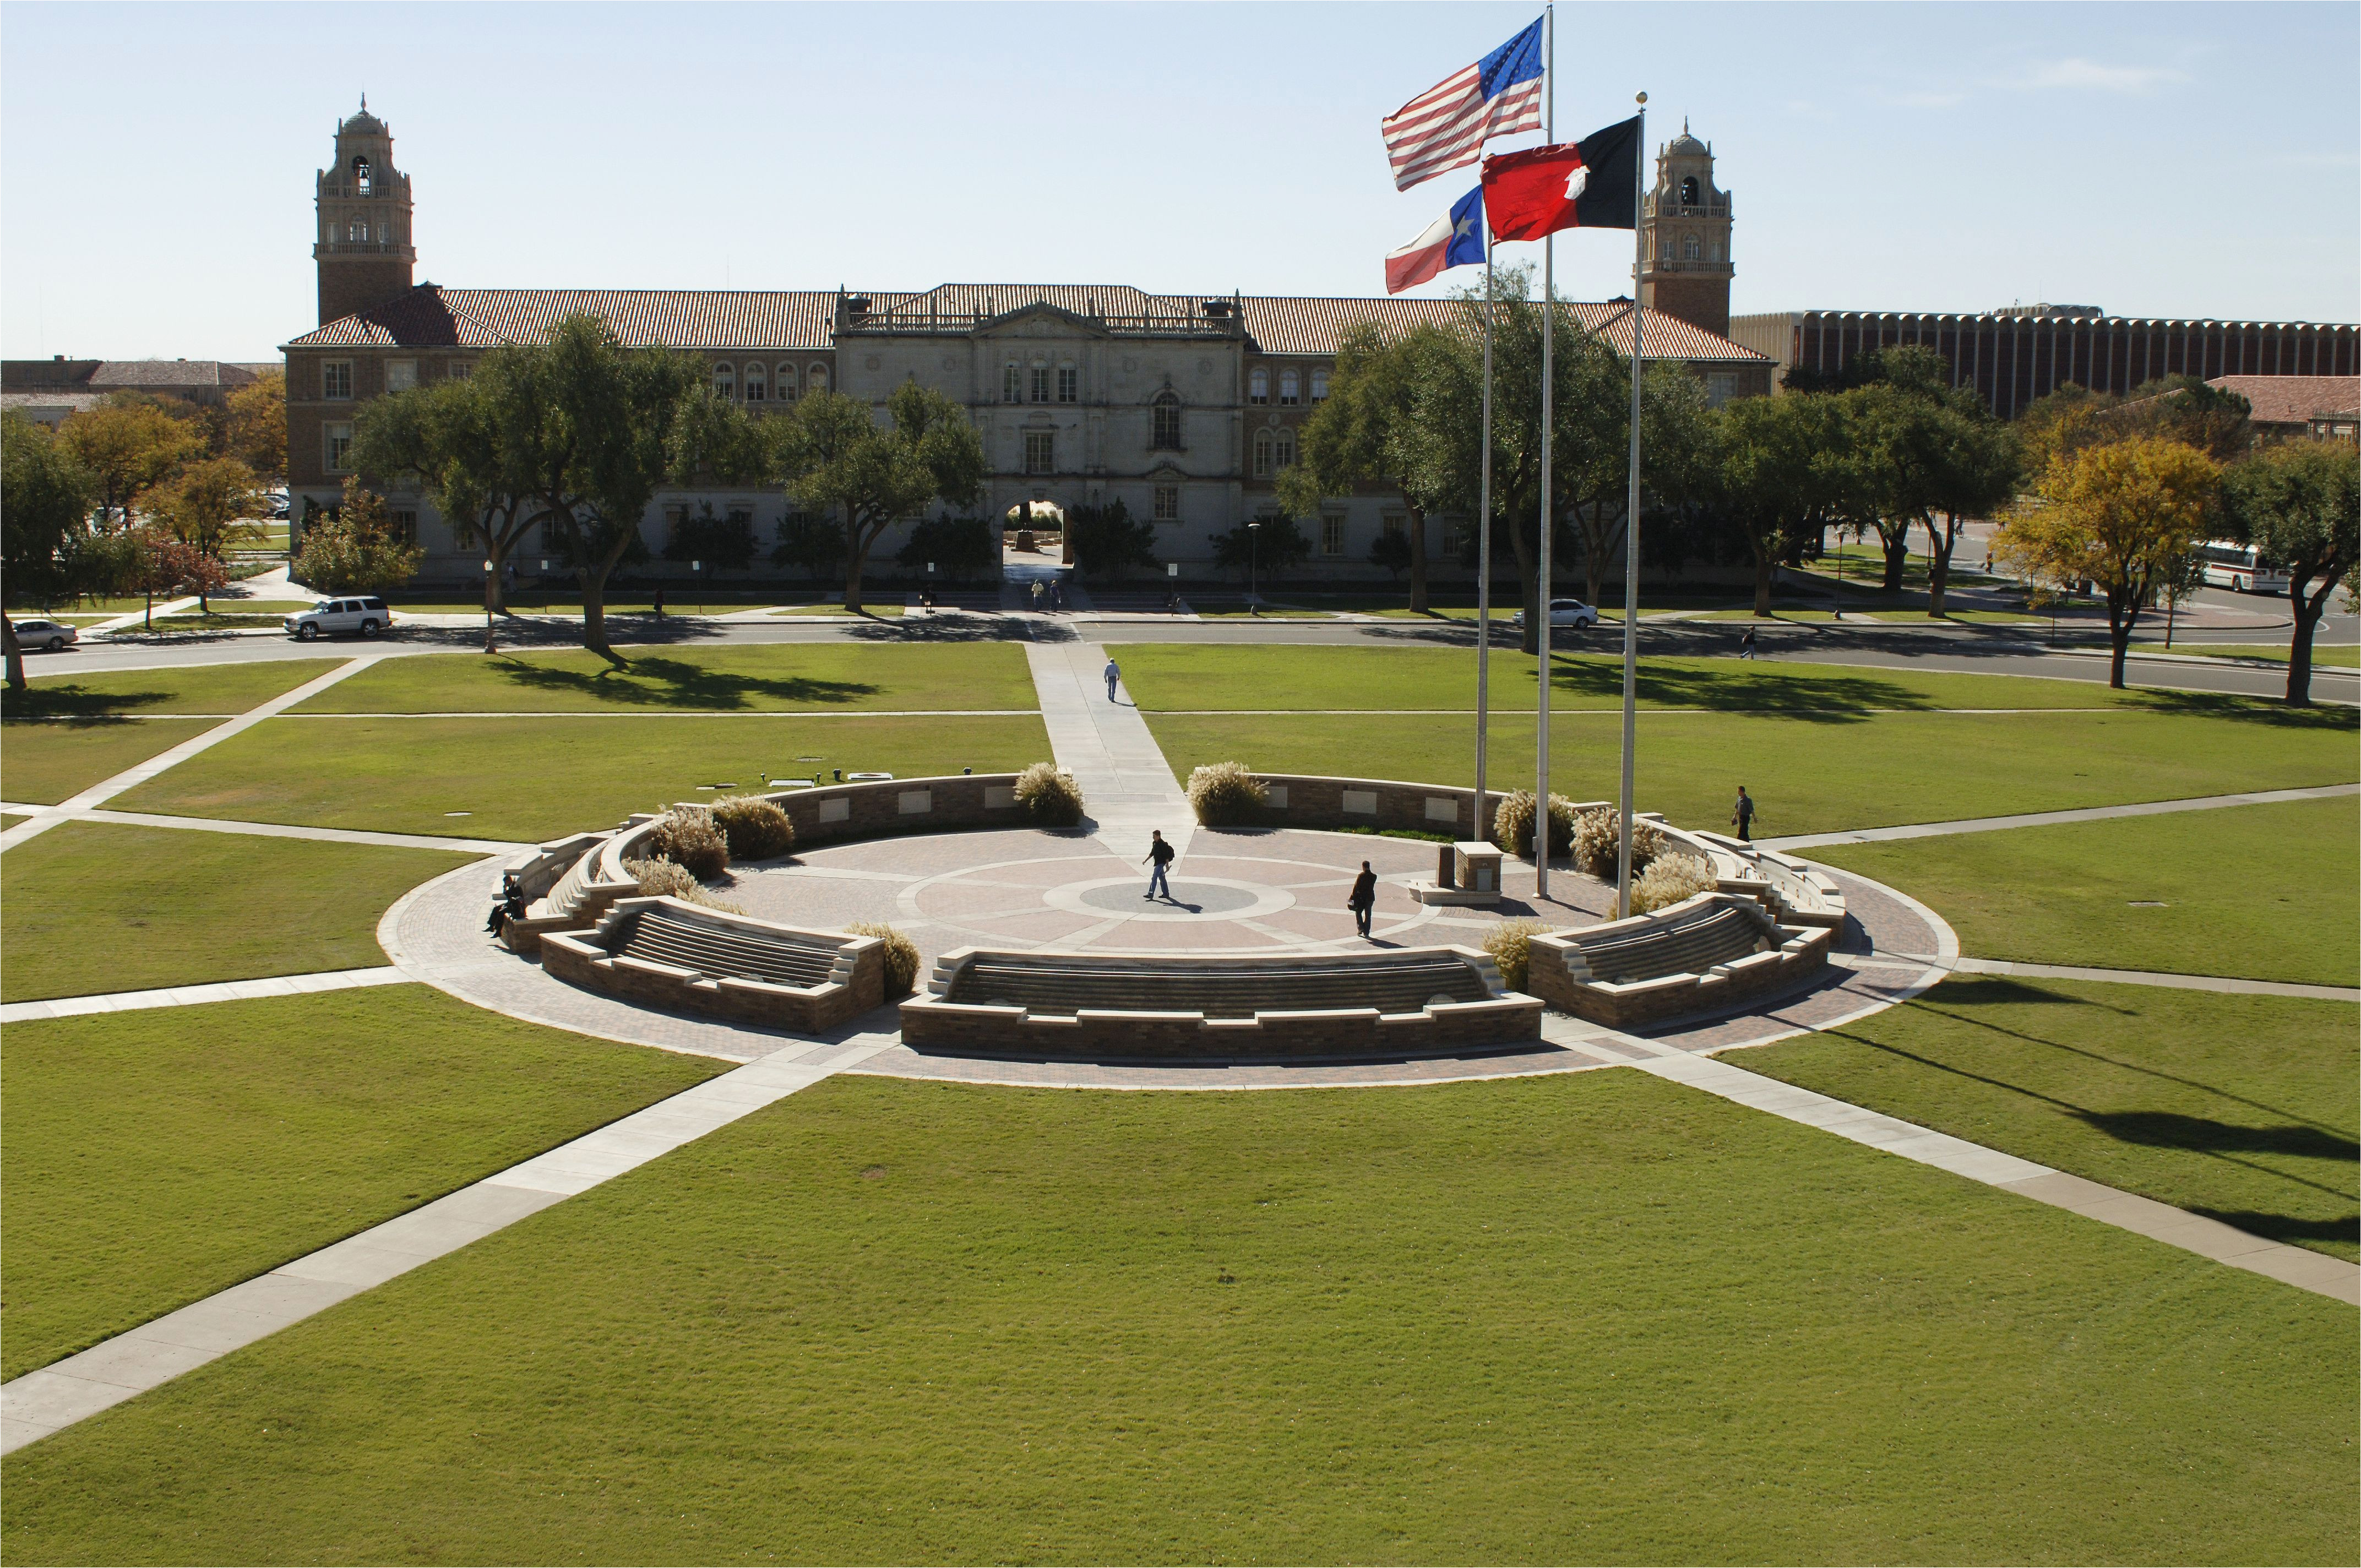 favorite place ever my beautiful texas tech campus miss it so